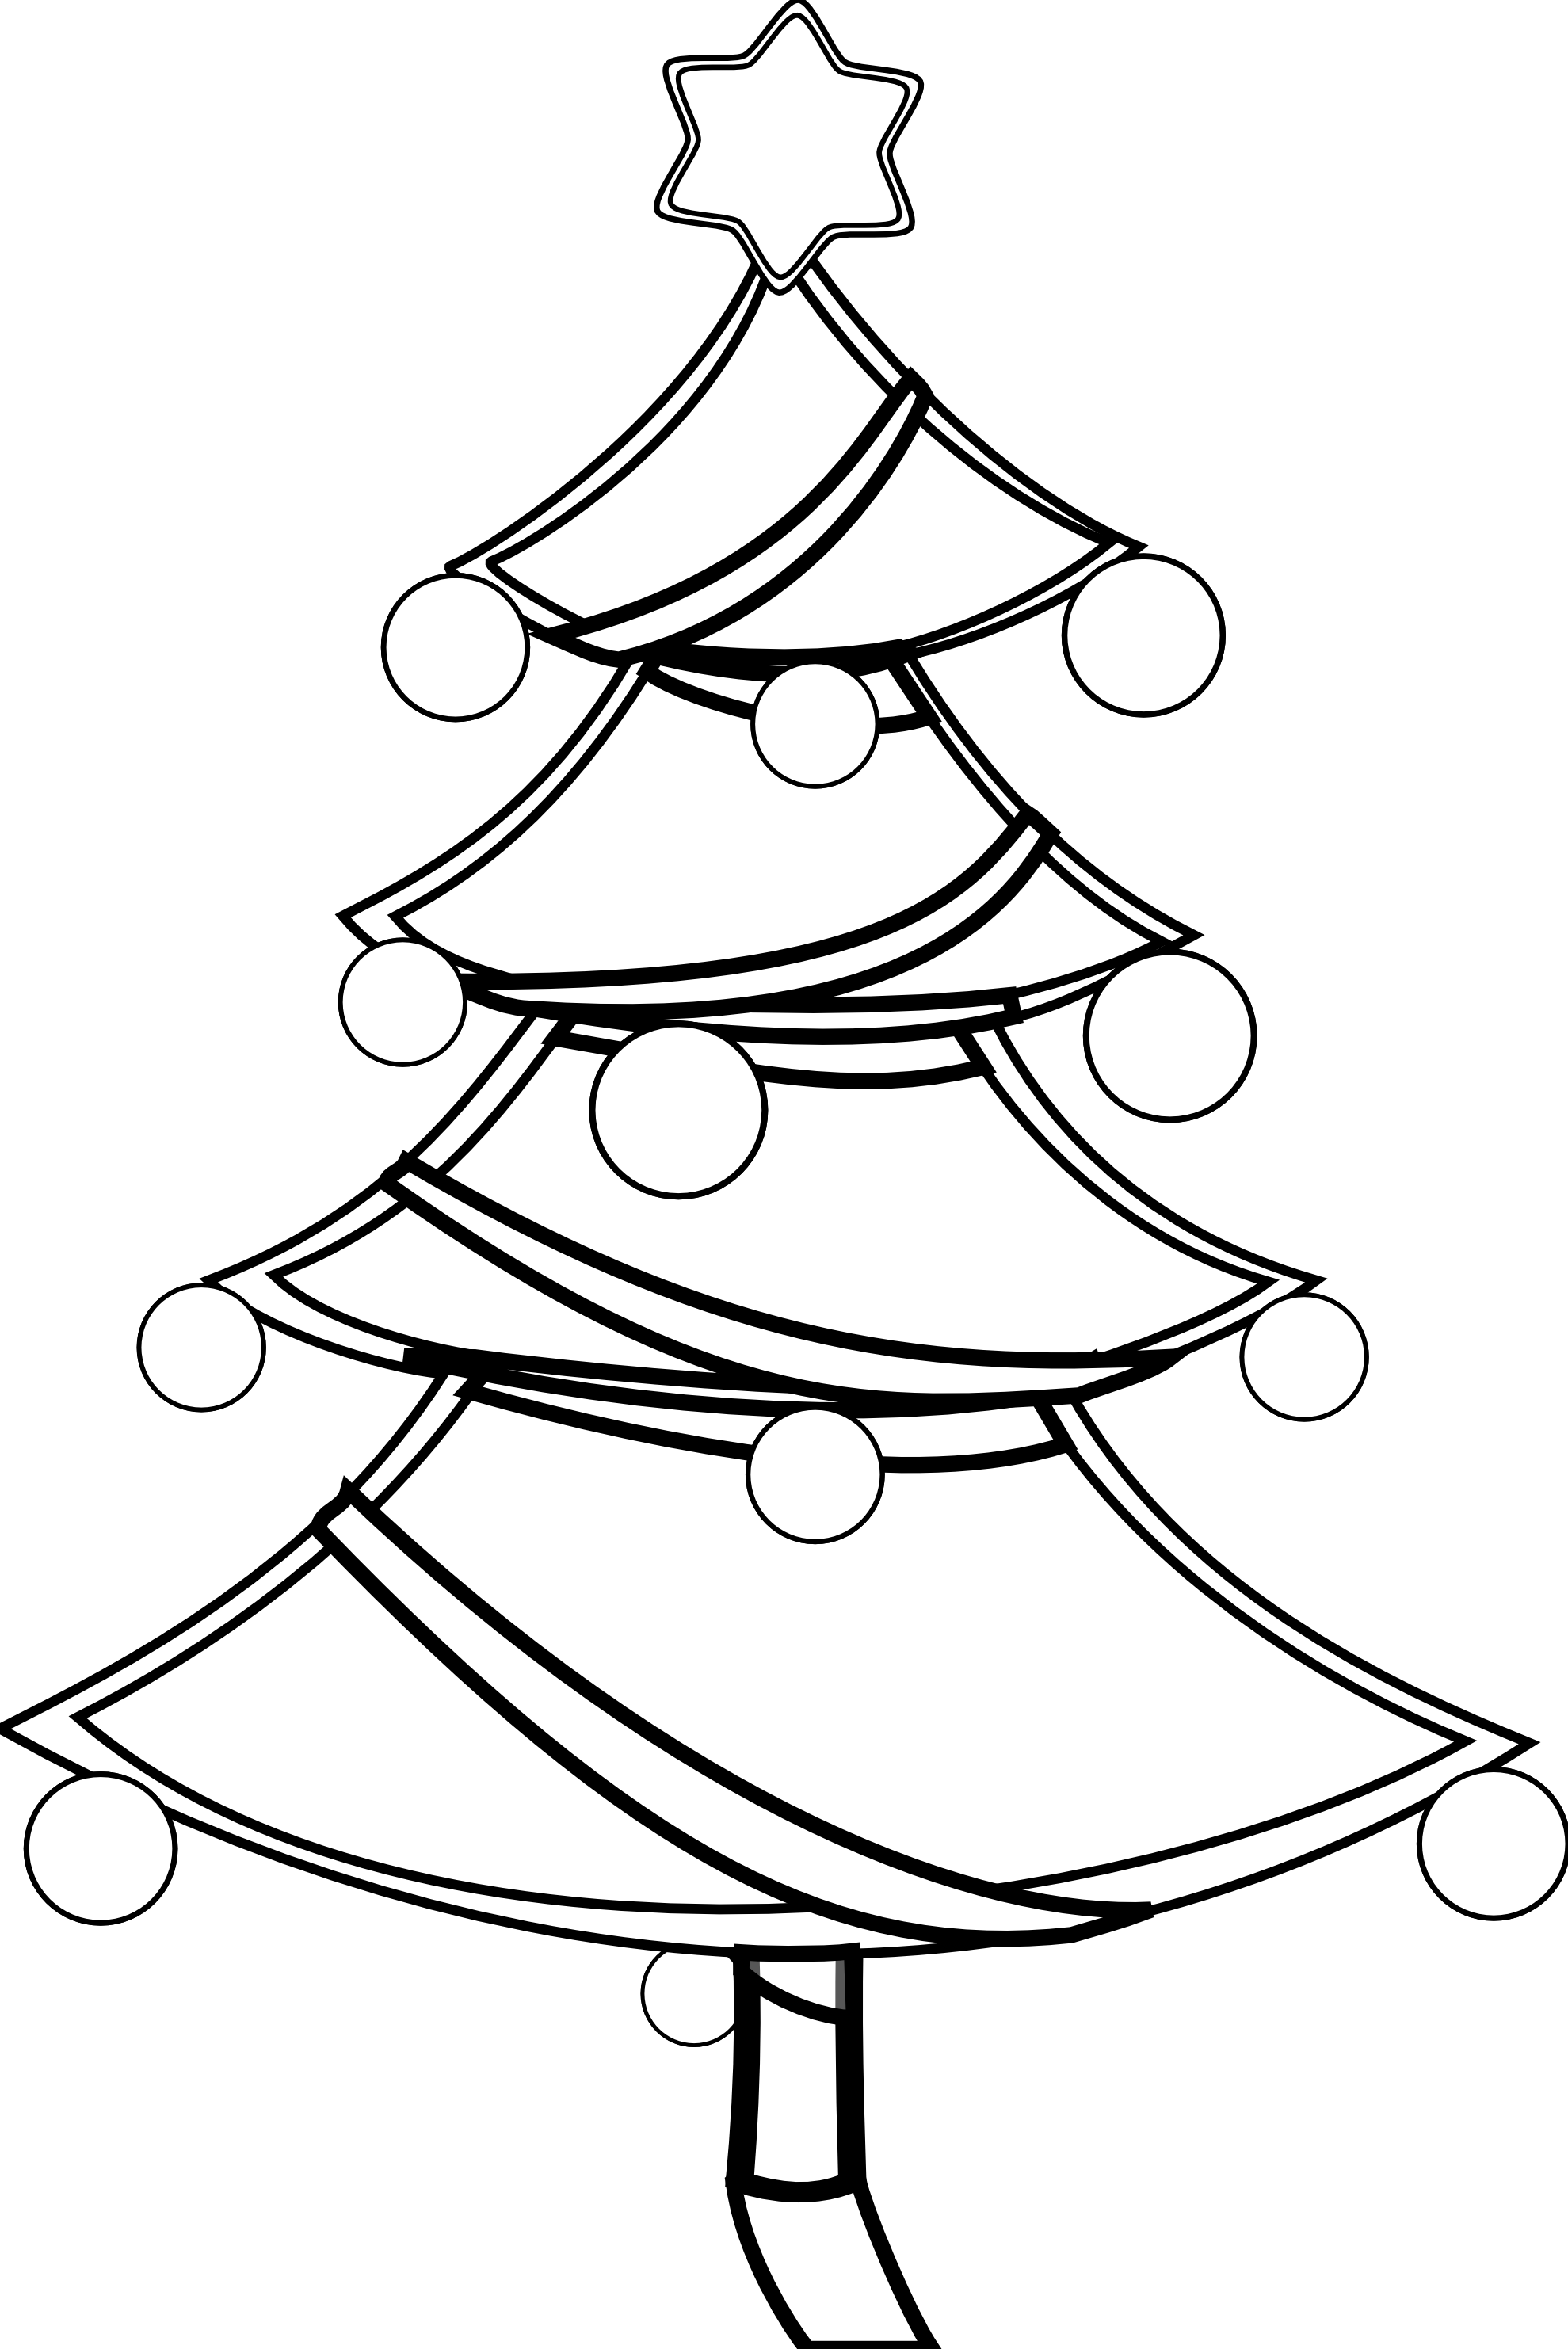 Line Drawing Of A Tree - Clipart library